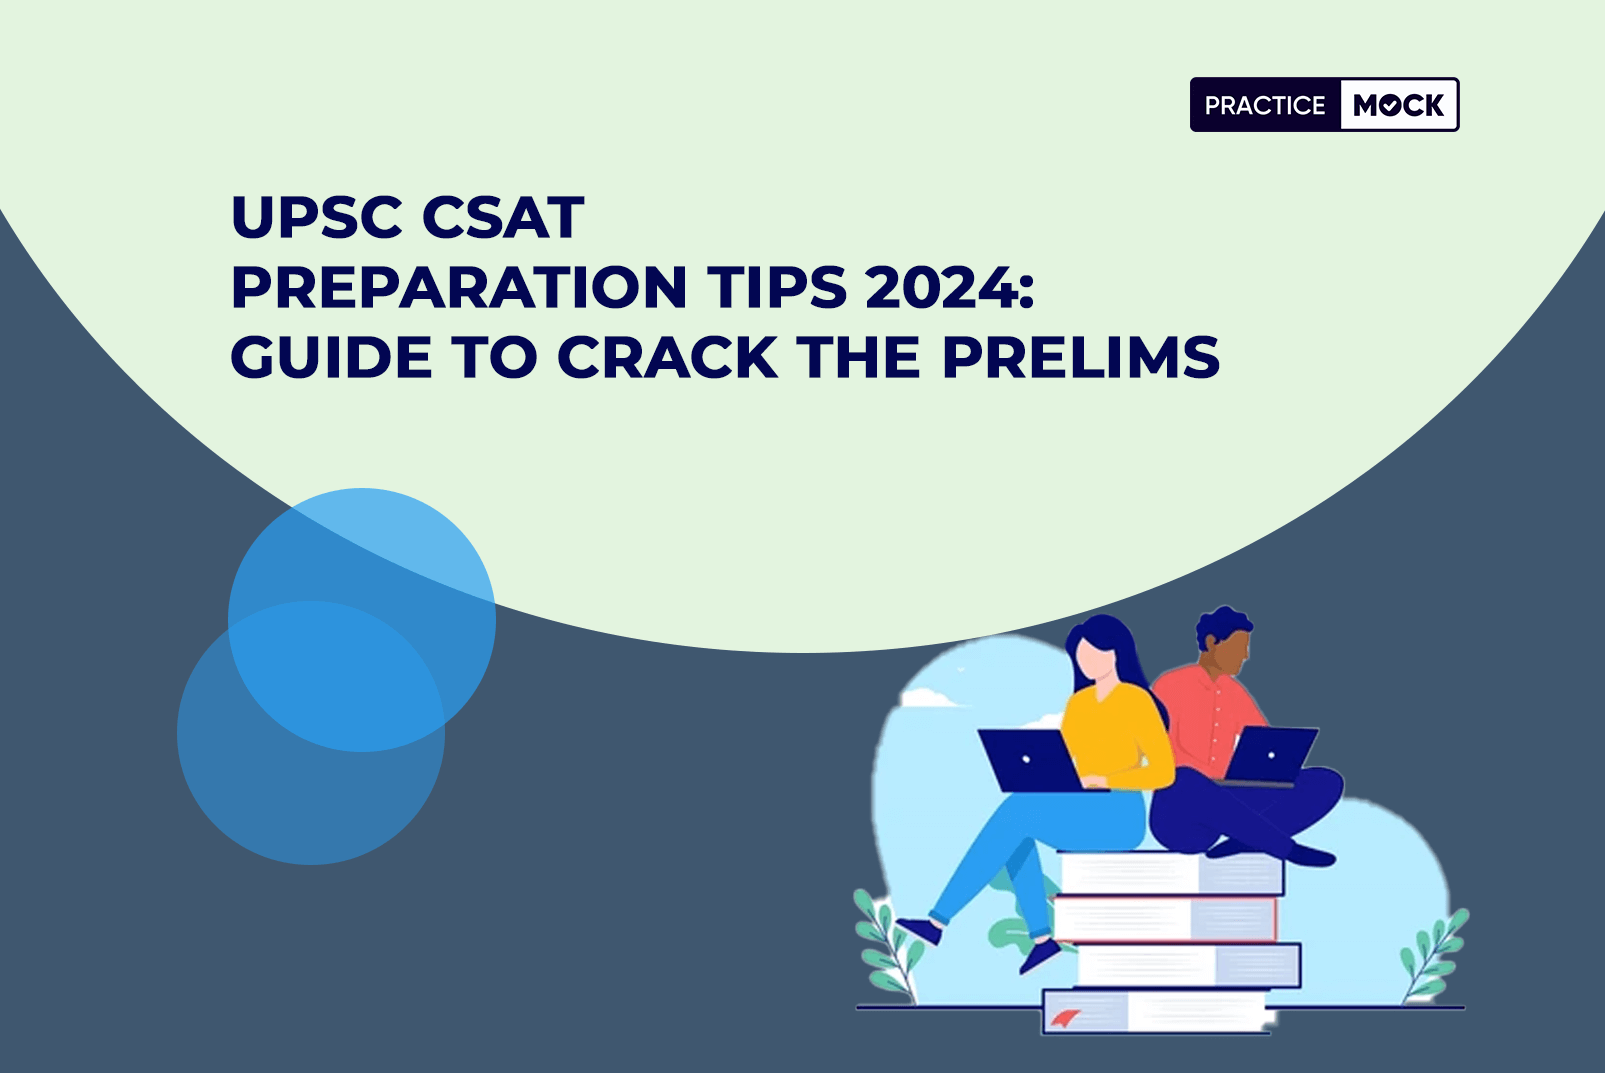 UPSC CSAT Preparation Tips 2024 Guide to Crack the Prelims